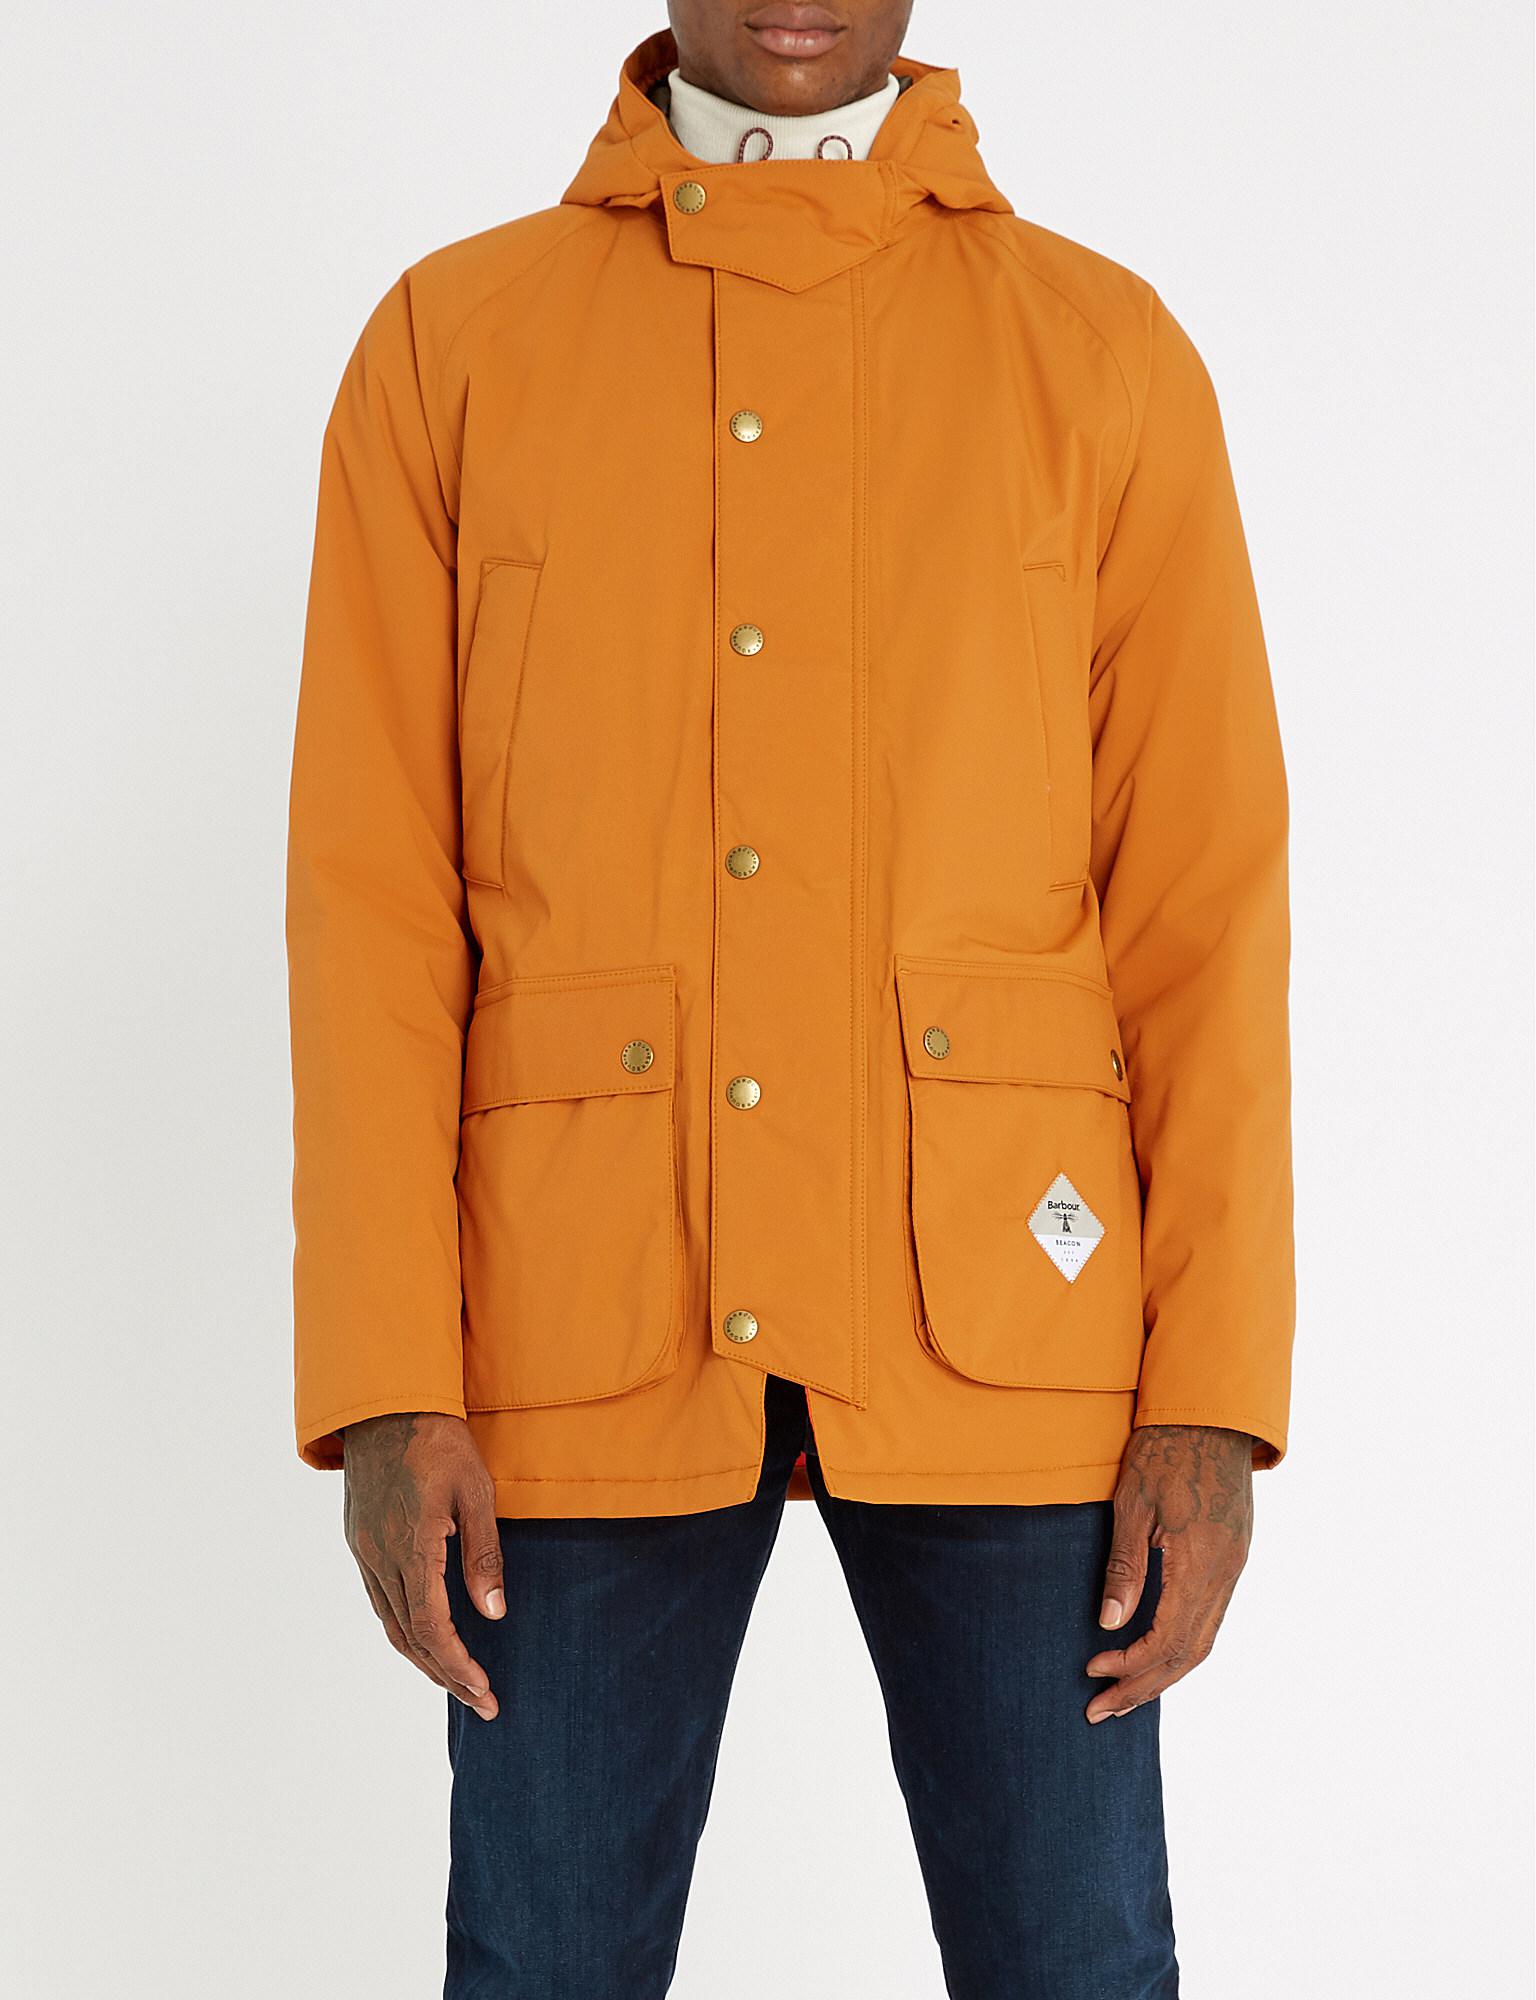 Barbour Beacon Fell Jacket Cinder Flash Sales, UP TO 63% OFF |  www.realliganaval.com